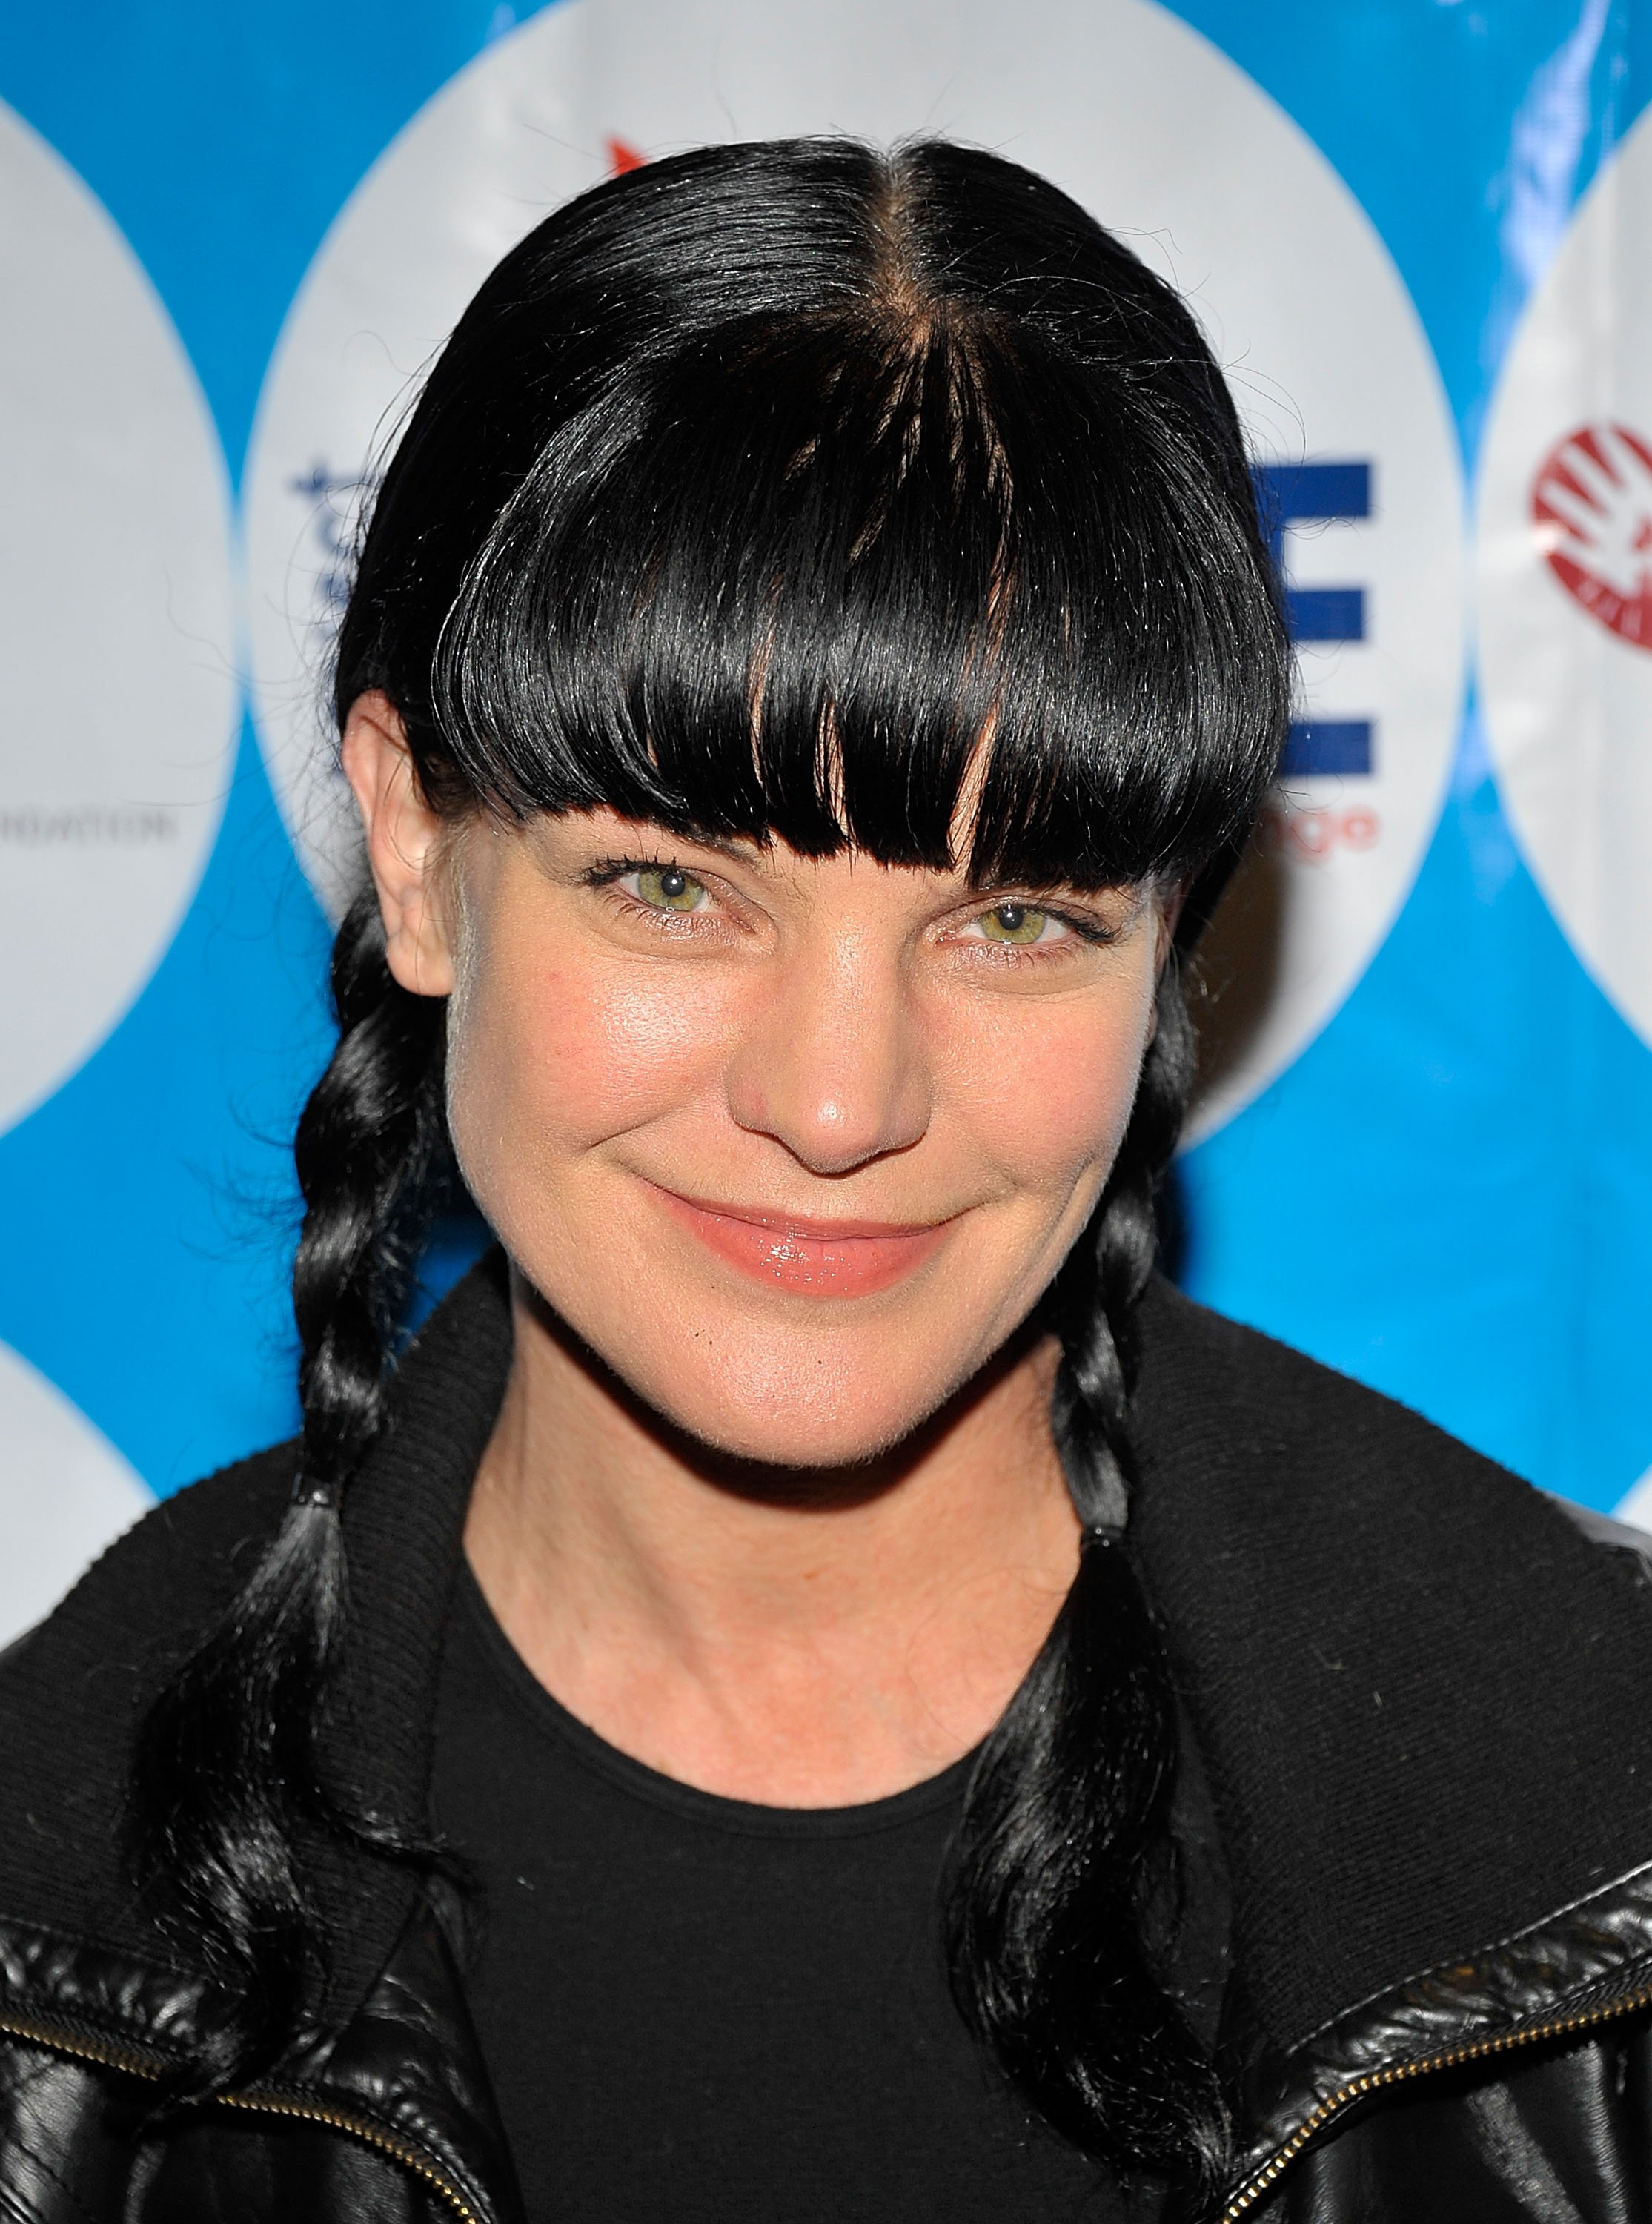 Actress Pauley Perrette at the UCLA Dance Marathon benefiting Pediatric AIDS Coalition on February 19, 2011 |Photo:Getty Images